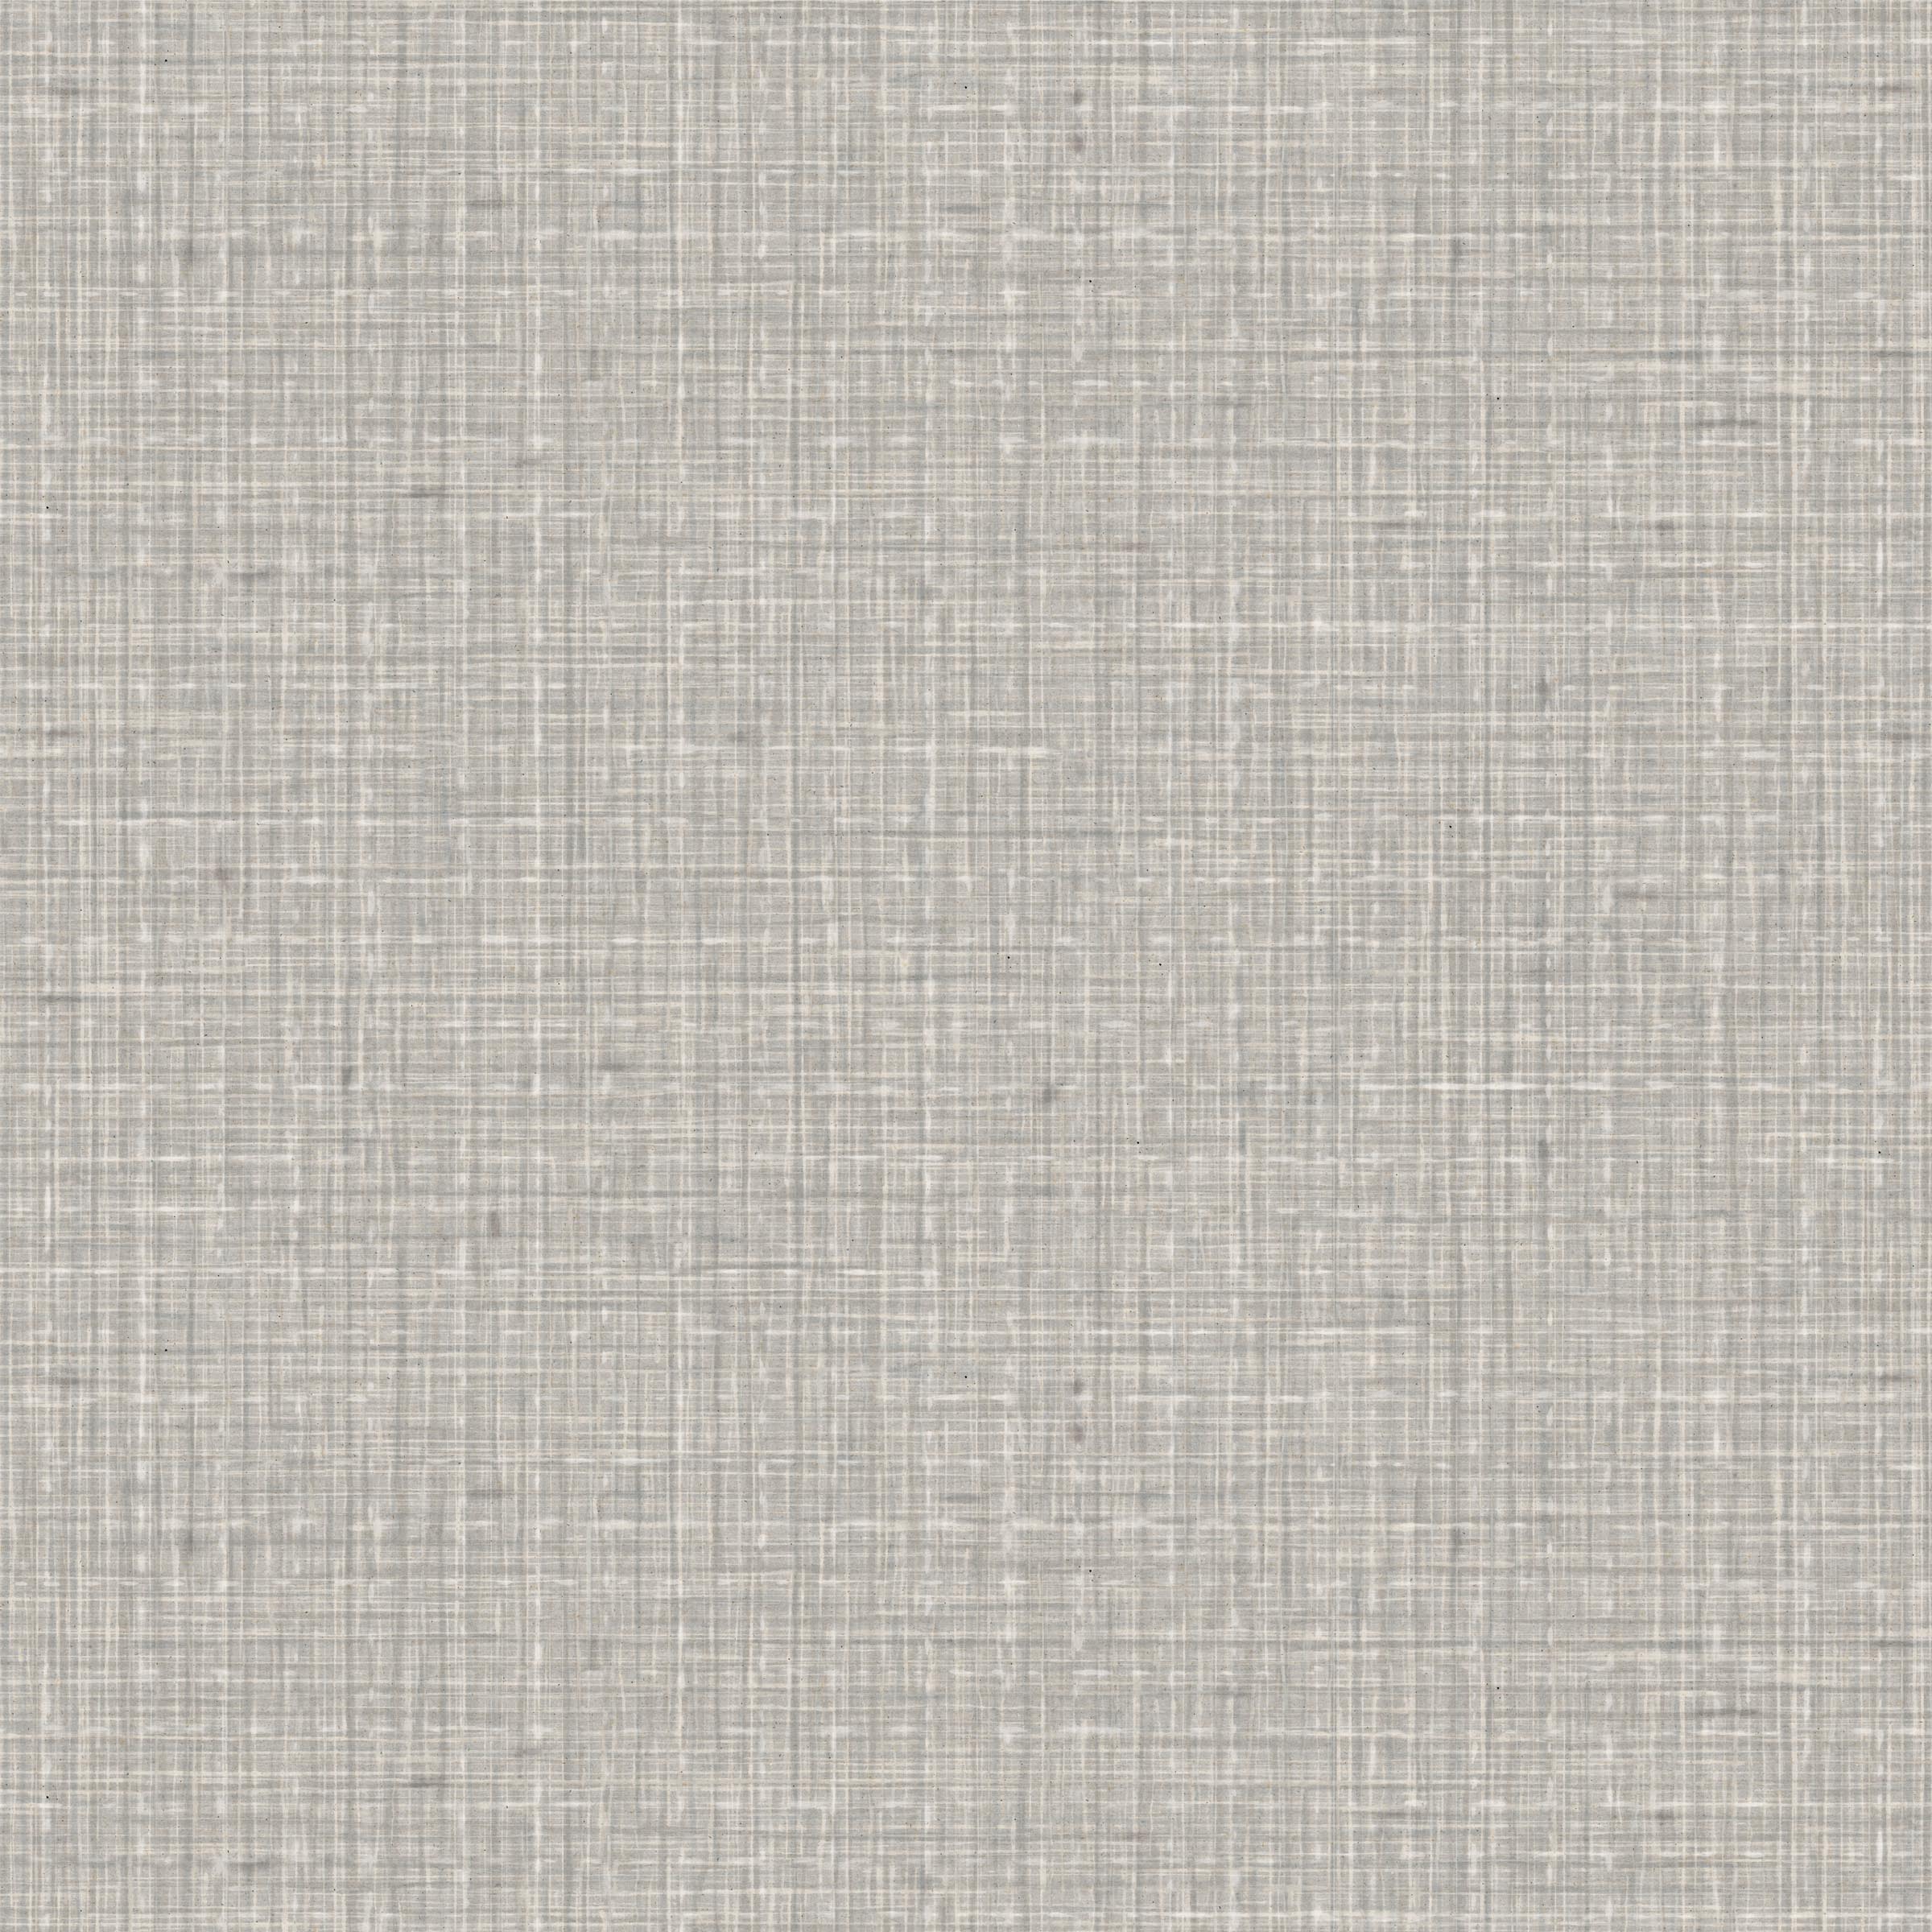 Detail of wallpaper in a textured tweed pattern in shades of gray. 